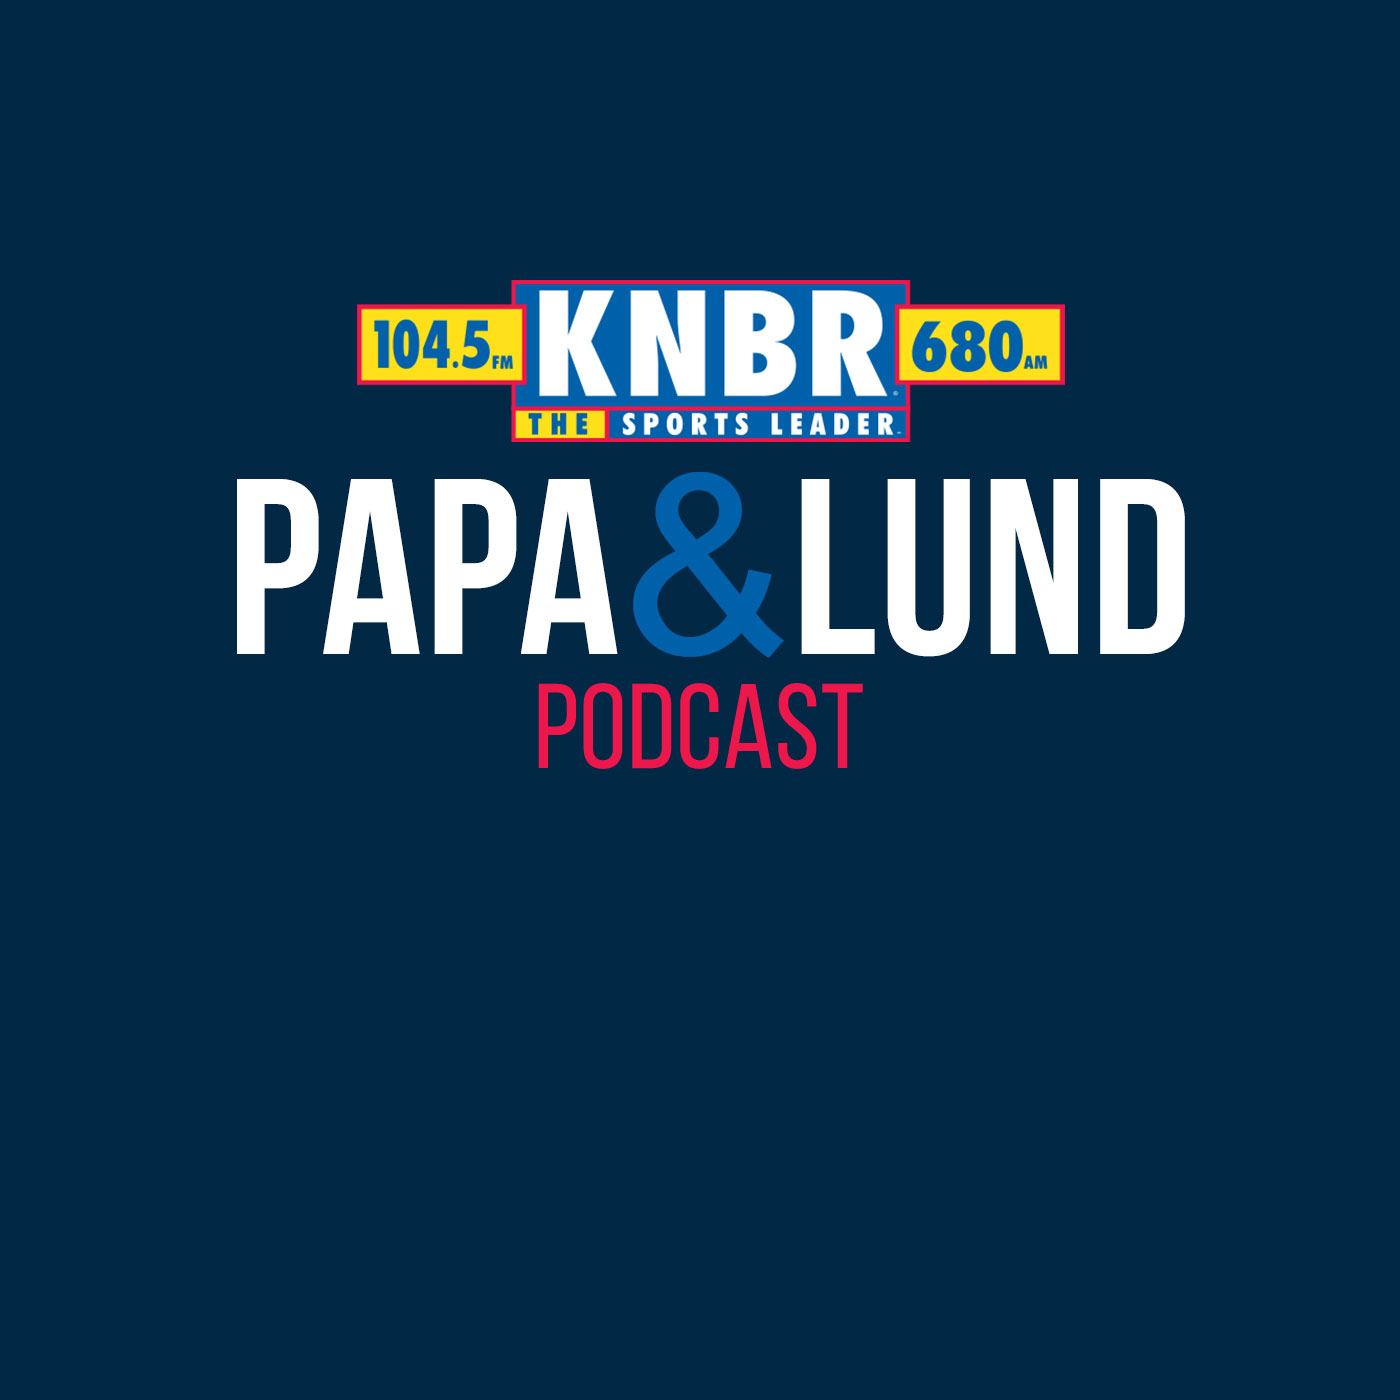 10-19 Dennis Brown joins Papa & Lund to discuss ring ceremonies as well as how the 49ers defense should attack Patrick Mahomes as the 49ers prepare for a Superbowl rematch against the Chiefs